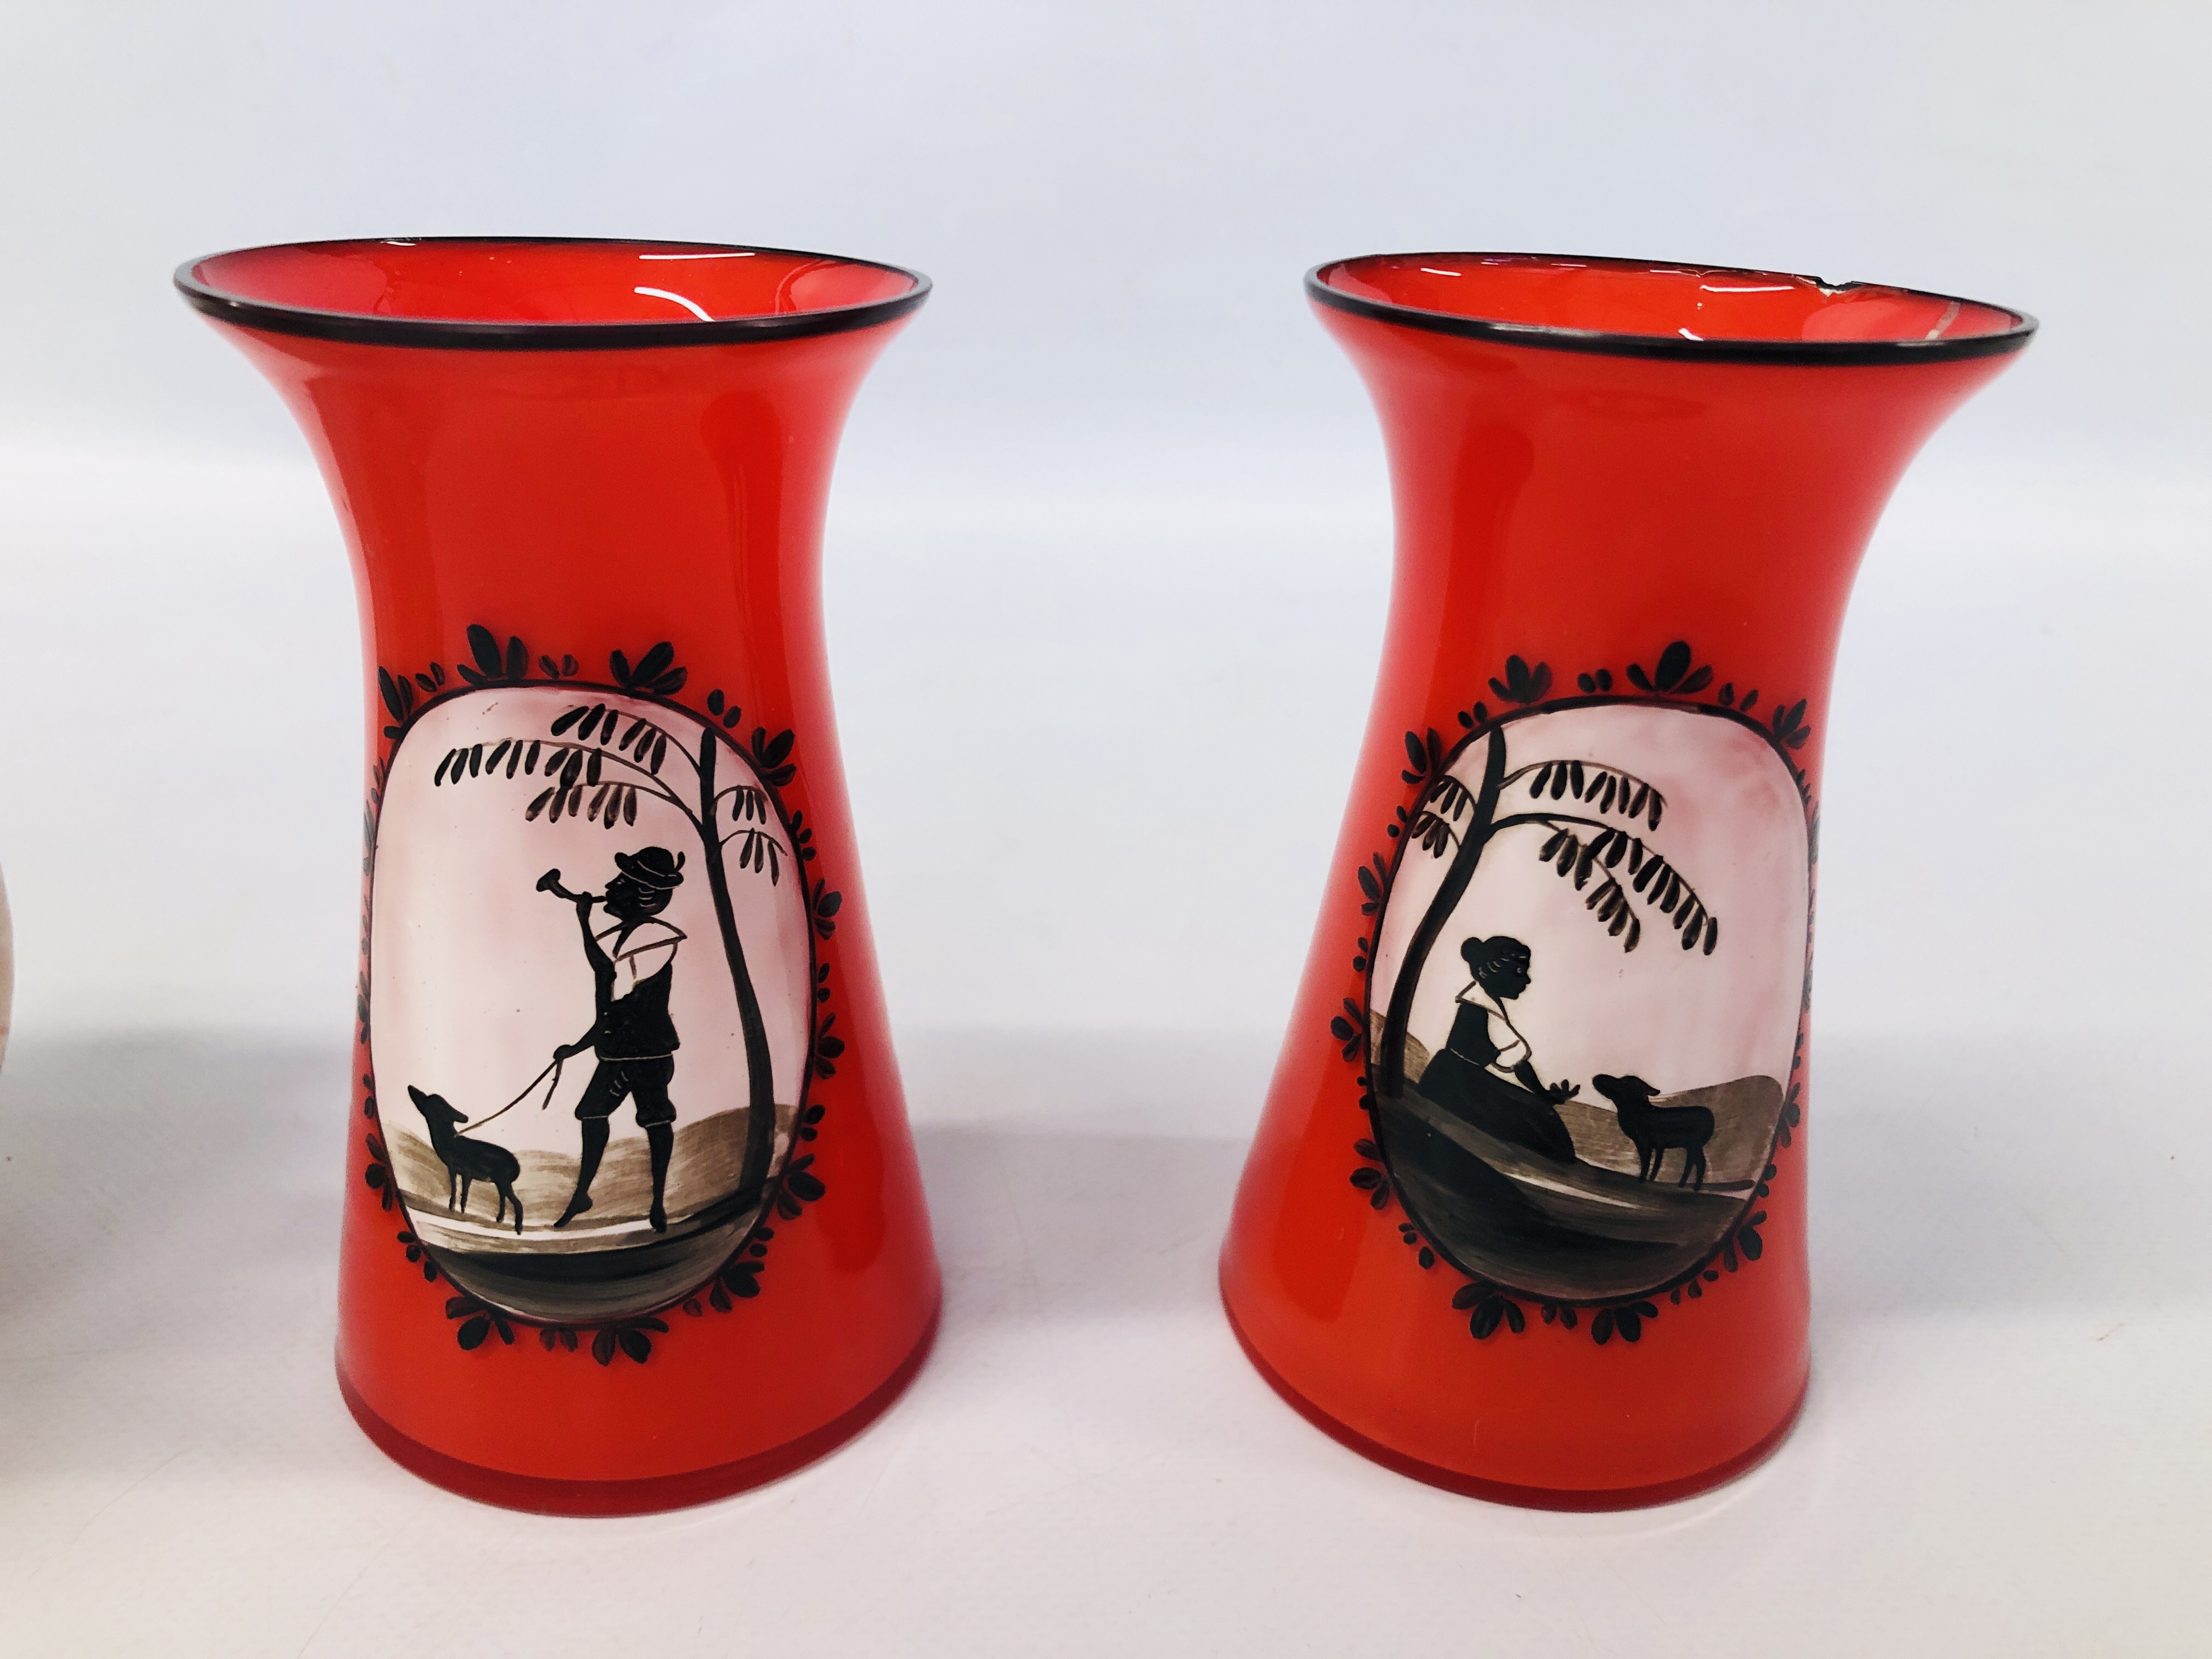 PAIR OF VINTAGE RED GLASS VASES DECORATED WITH A BLACK AND WHITE CAMEO DESIGN A/F, BELLEEK VASE. - Image 2 of 7